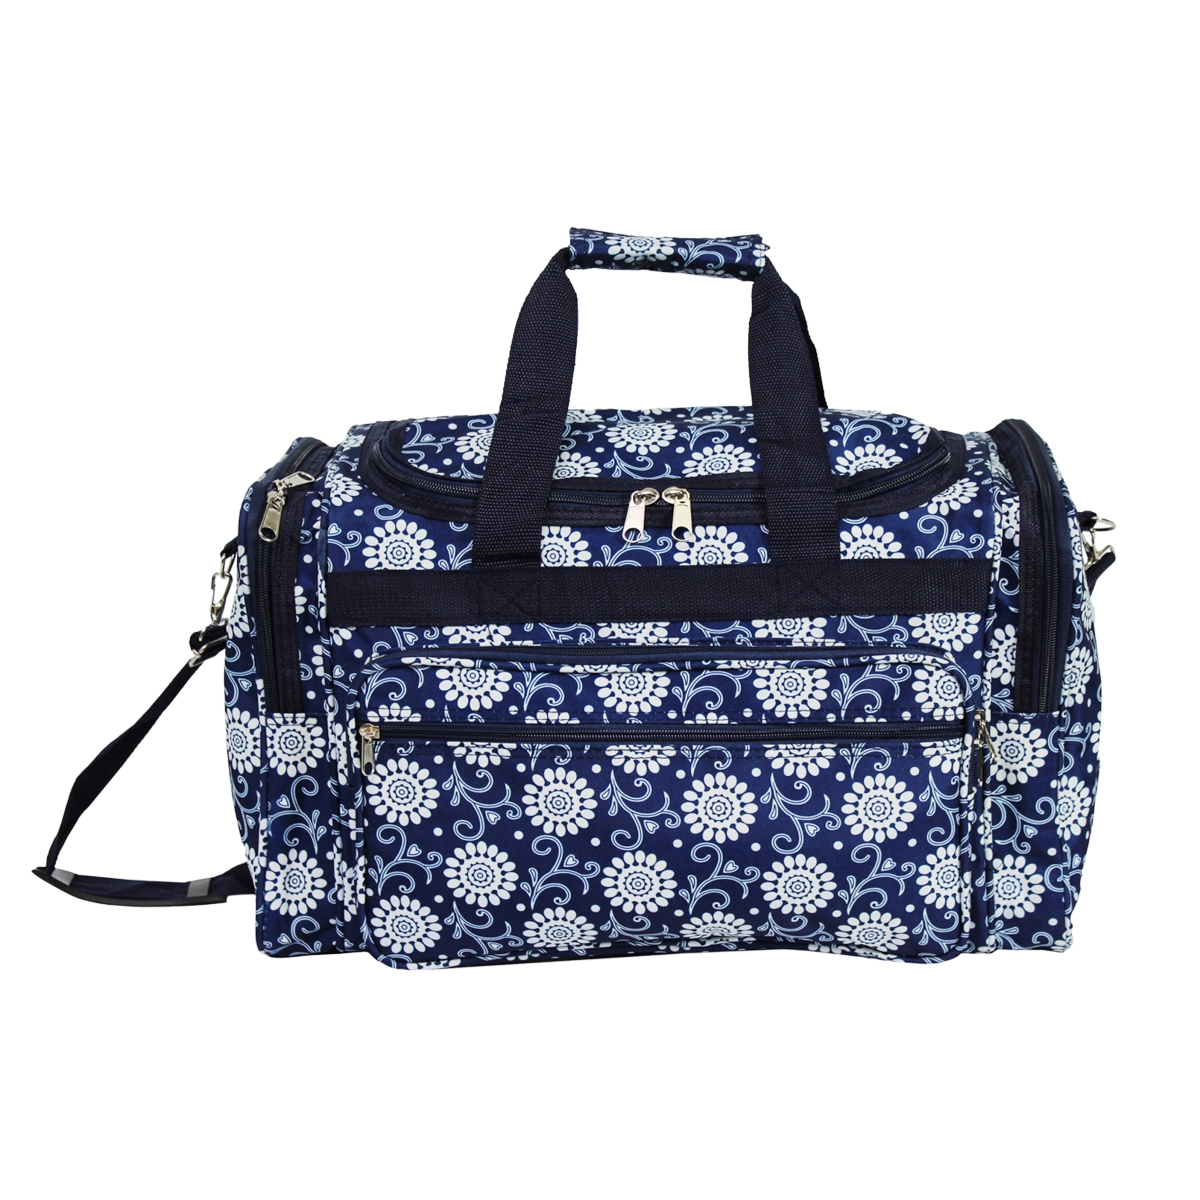 81t22-229 22 In. Carry-on Duffel Bag - Navy Vines Floral